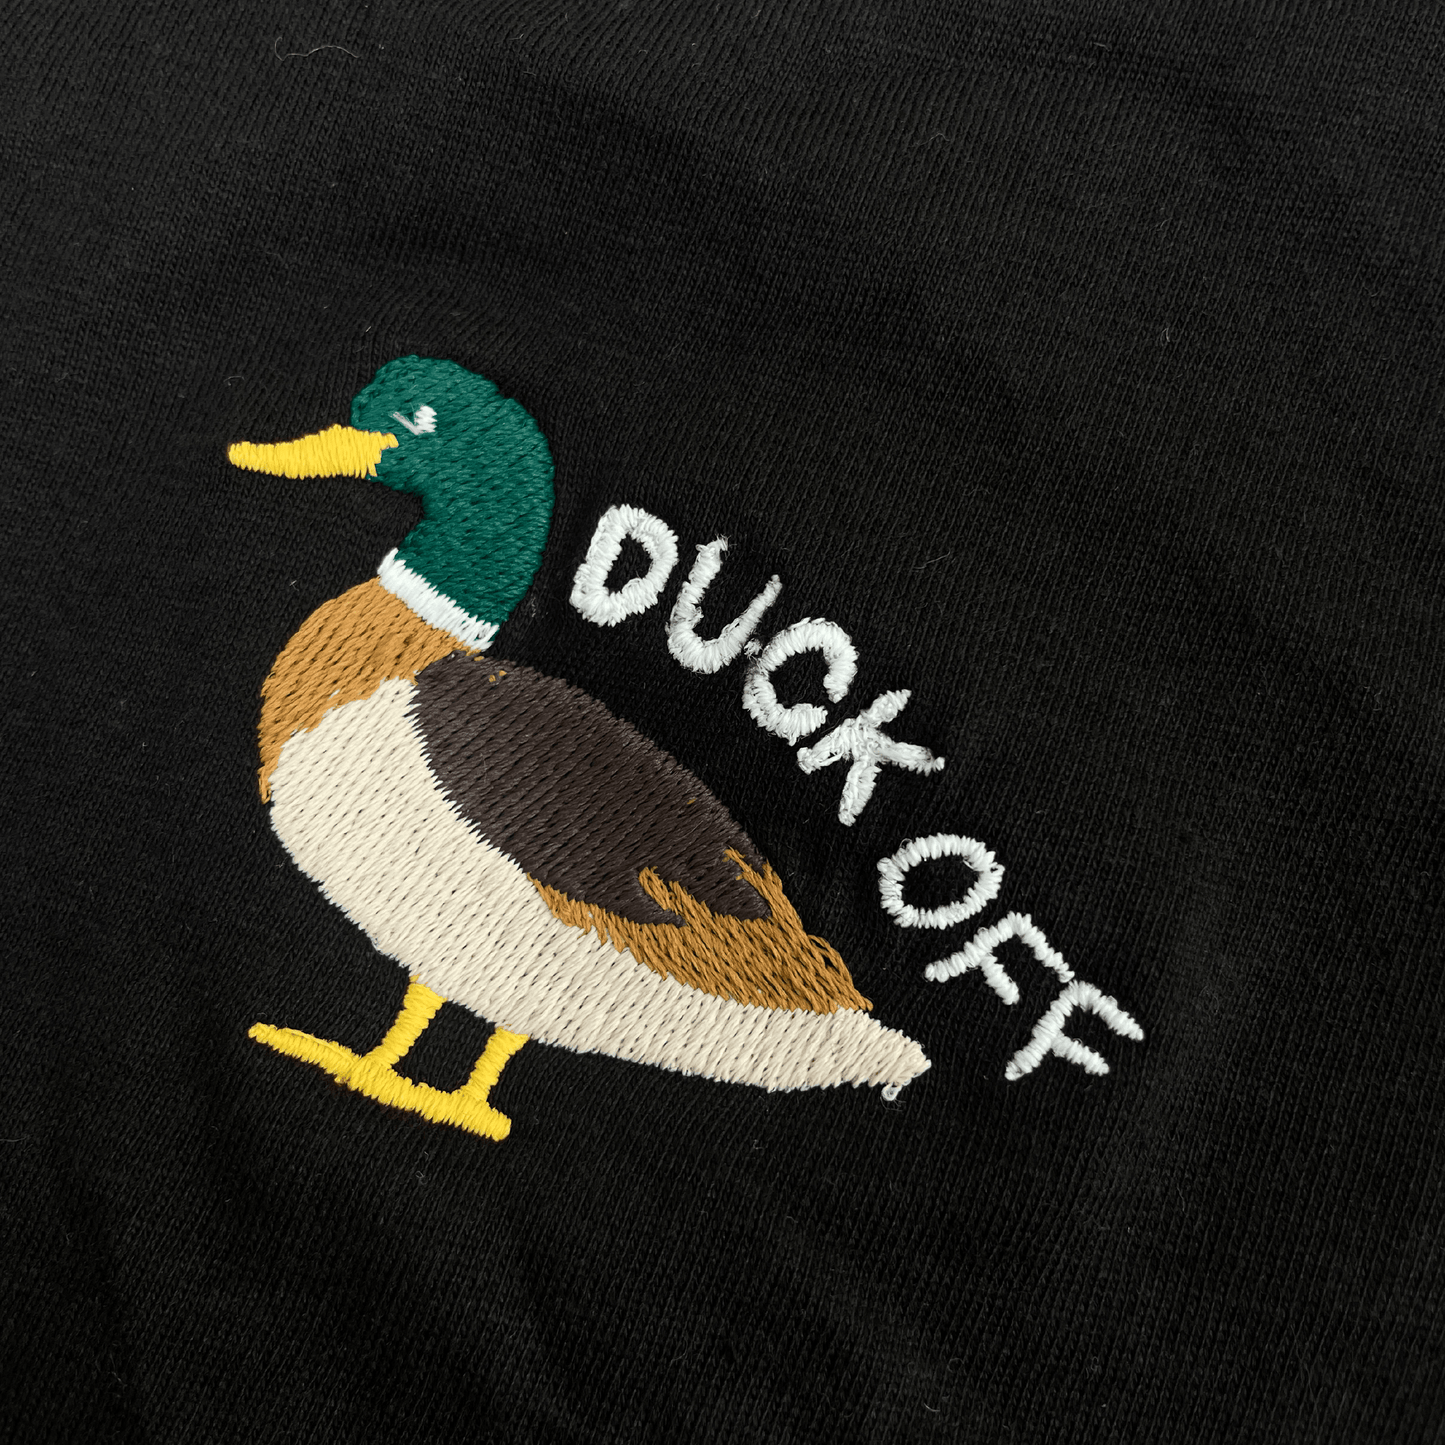 07_ Duck Off Large - DEFECT - Double stitching on words and small hole